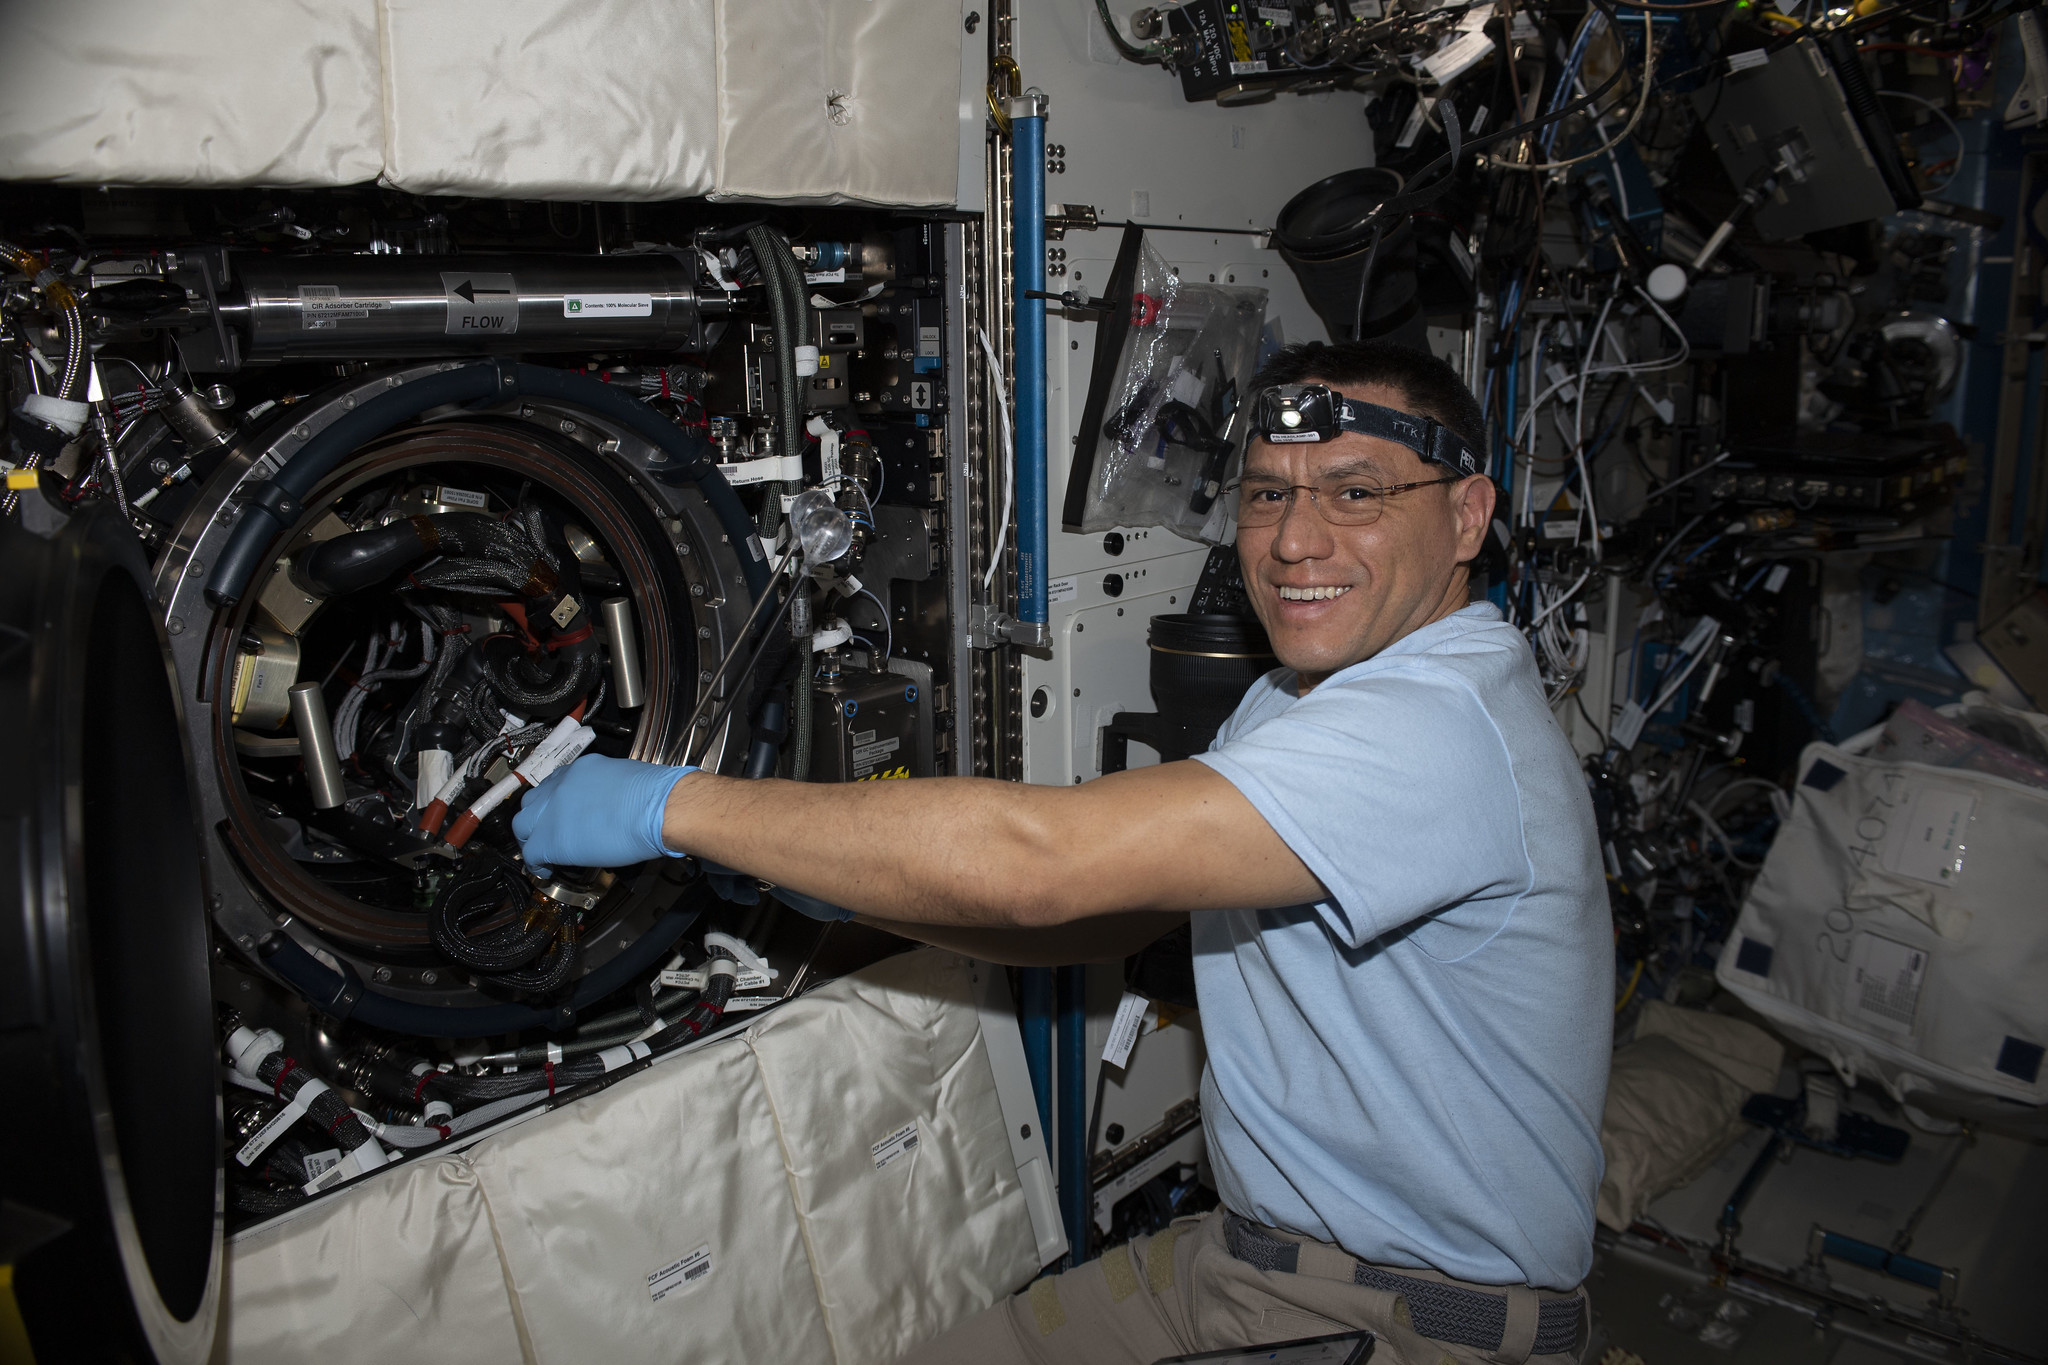 image of an astronaut working on setup of experiment hardware